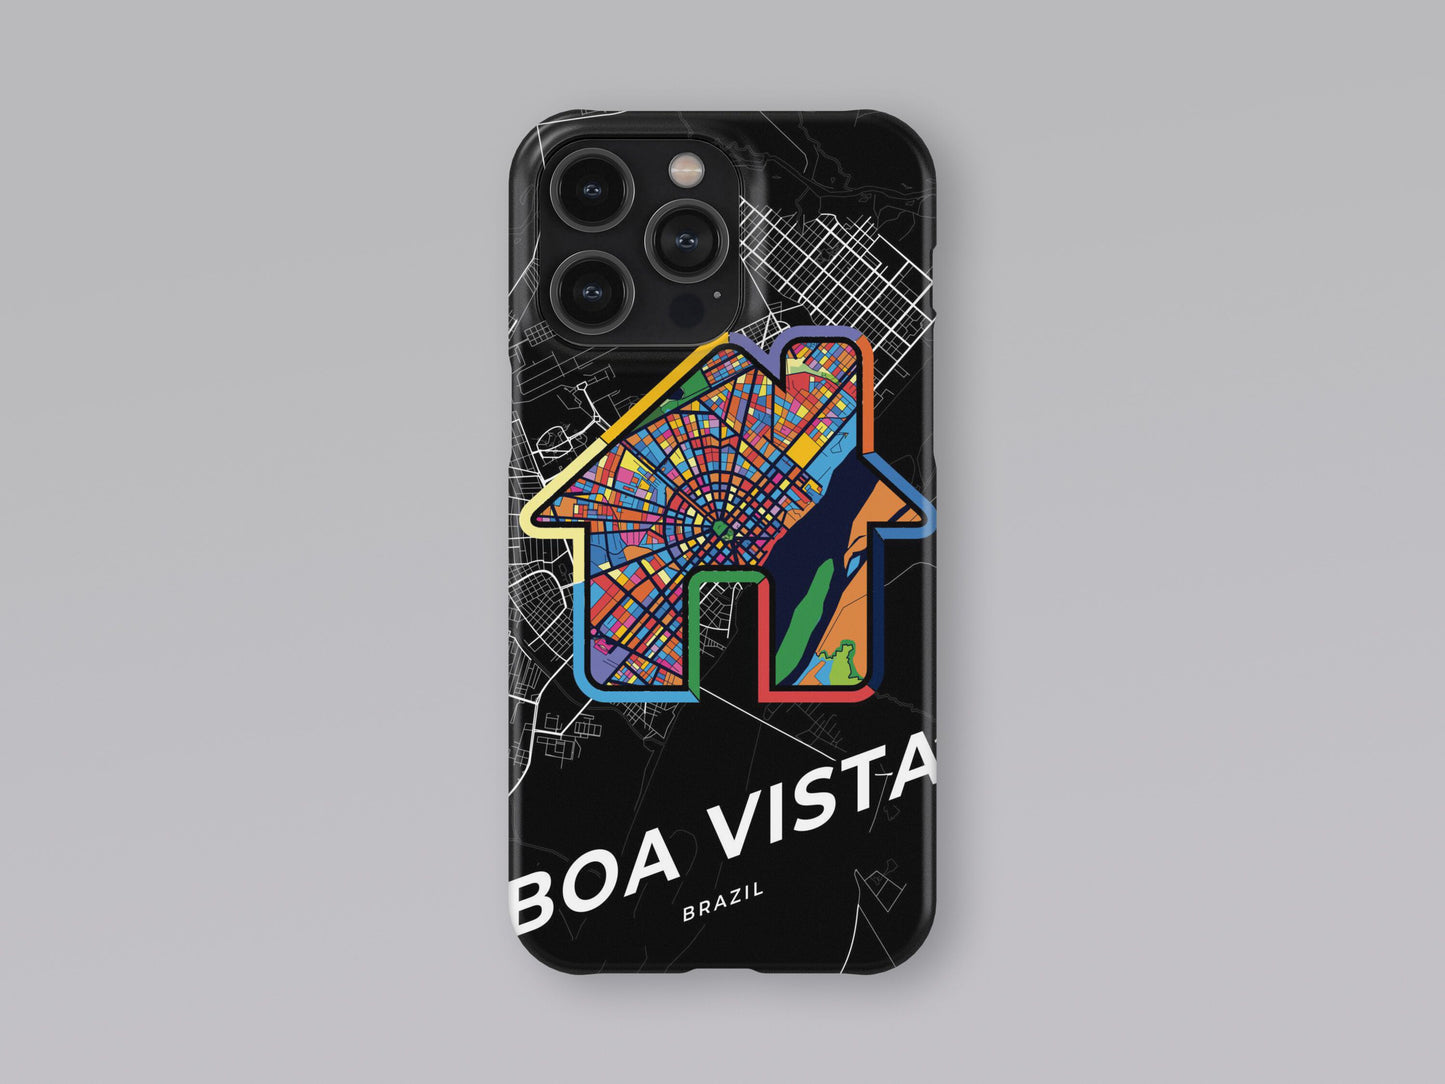 Boa Vista Brazil slim phone case with colorful icon. Birthday, wedding or housewarming gift. Couple match cases. 3